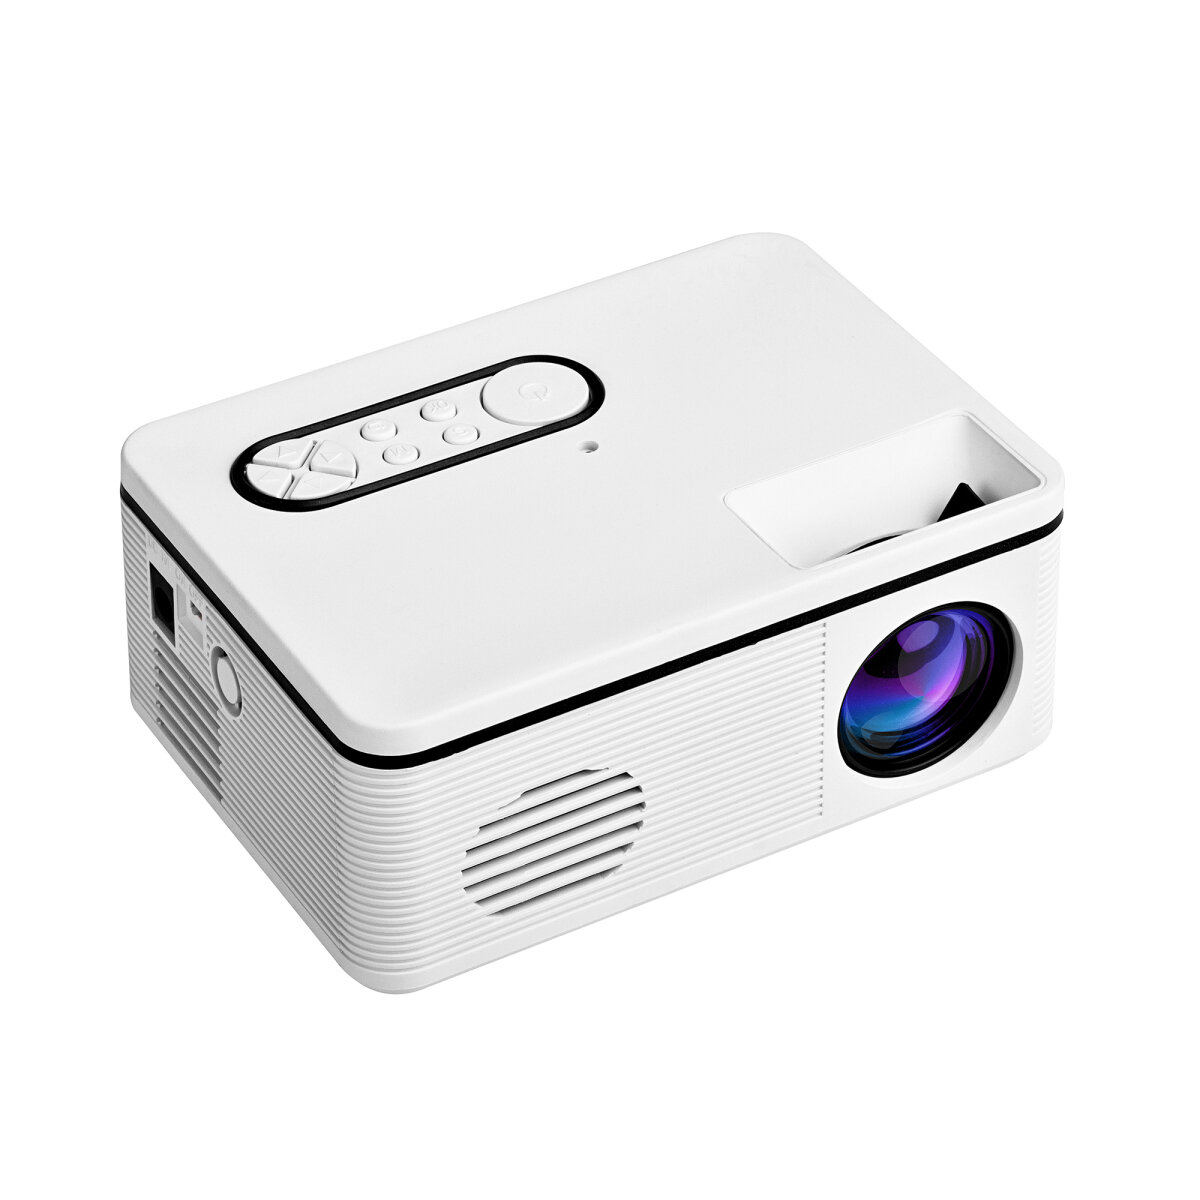 S361 LED Projector 1920x1080 Resolution 800:1 Contrast for Outdoor Movies Home Theater Projector Beamer with Remote Cont